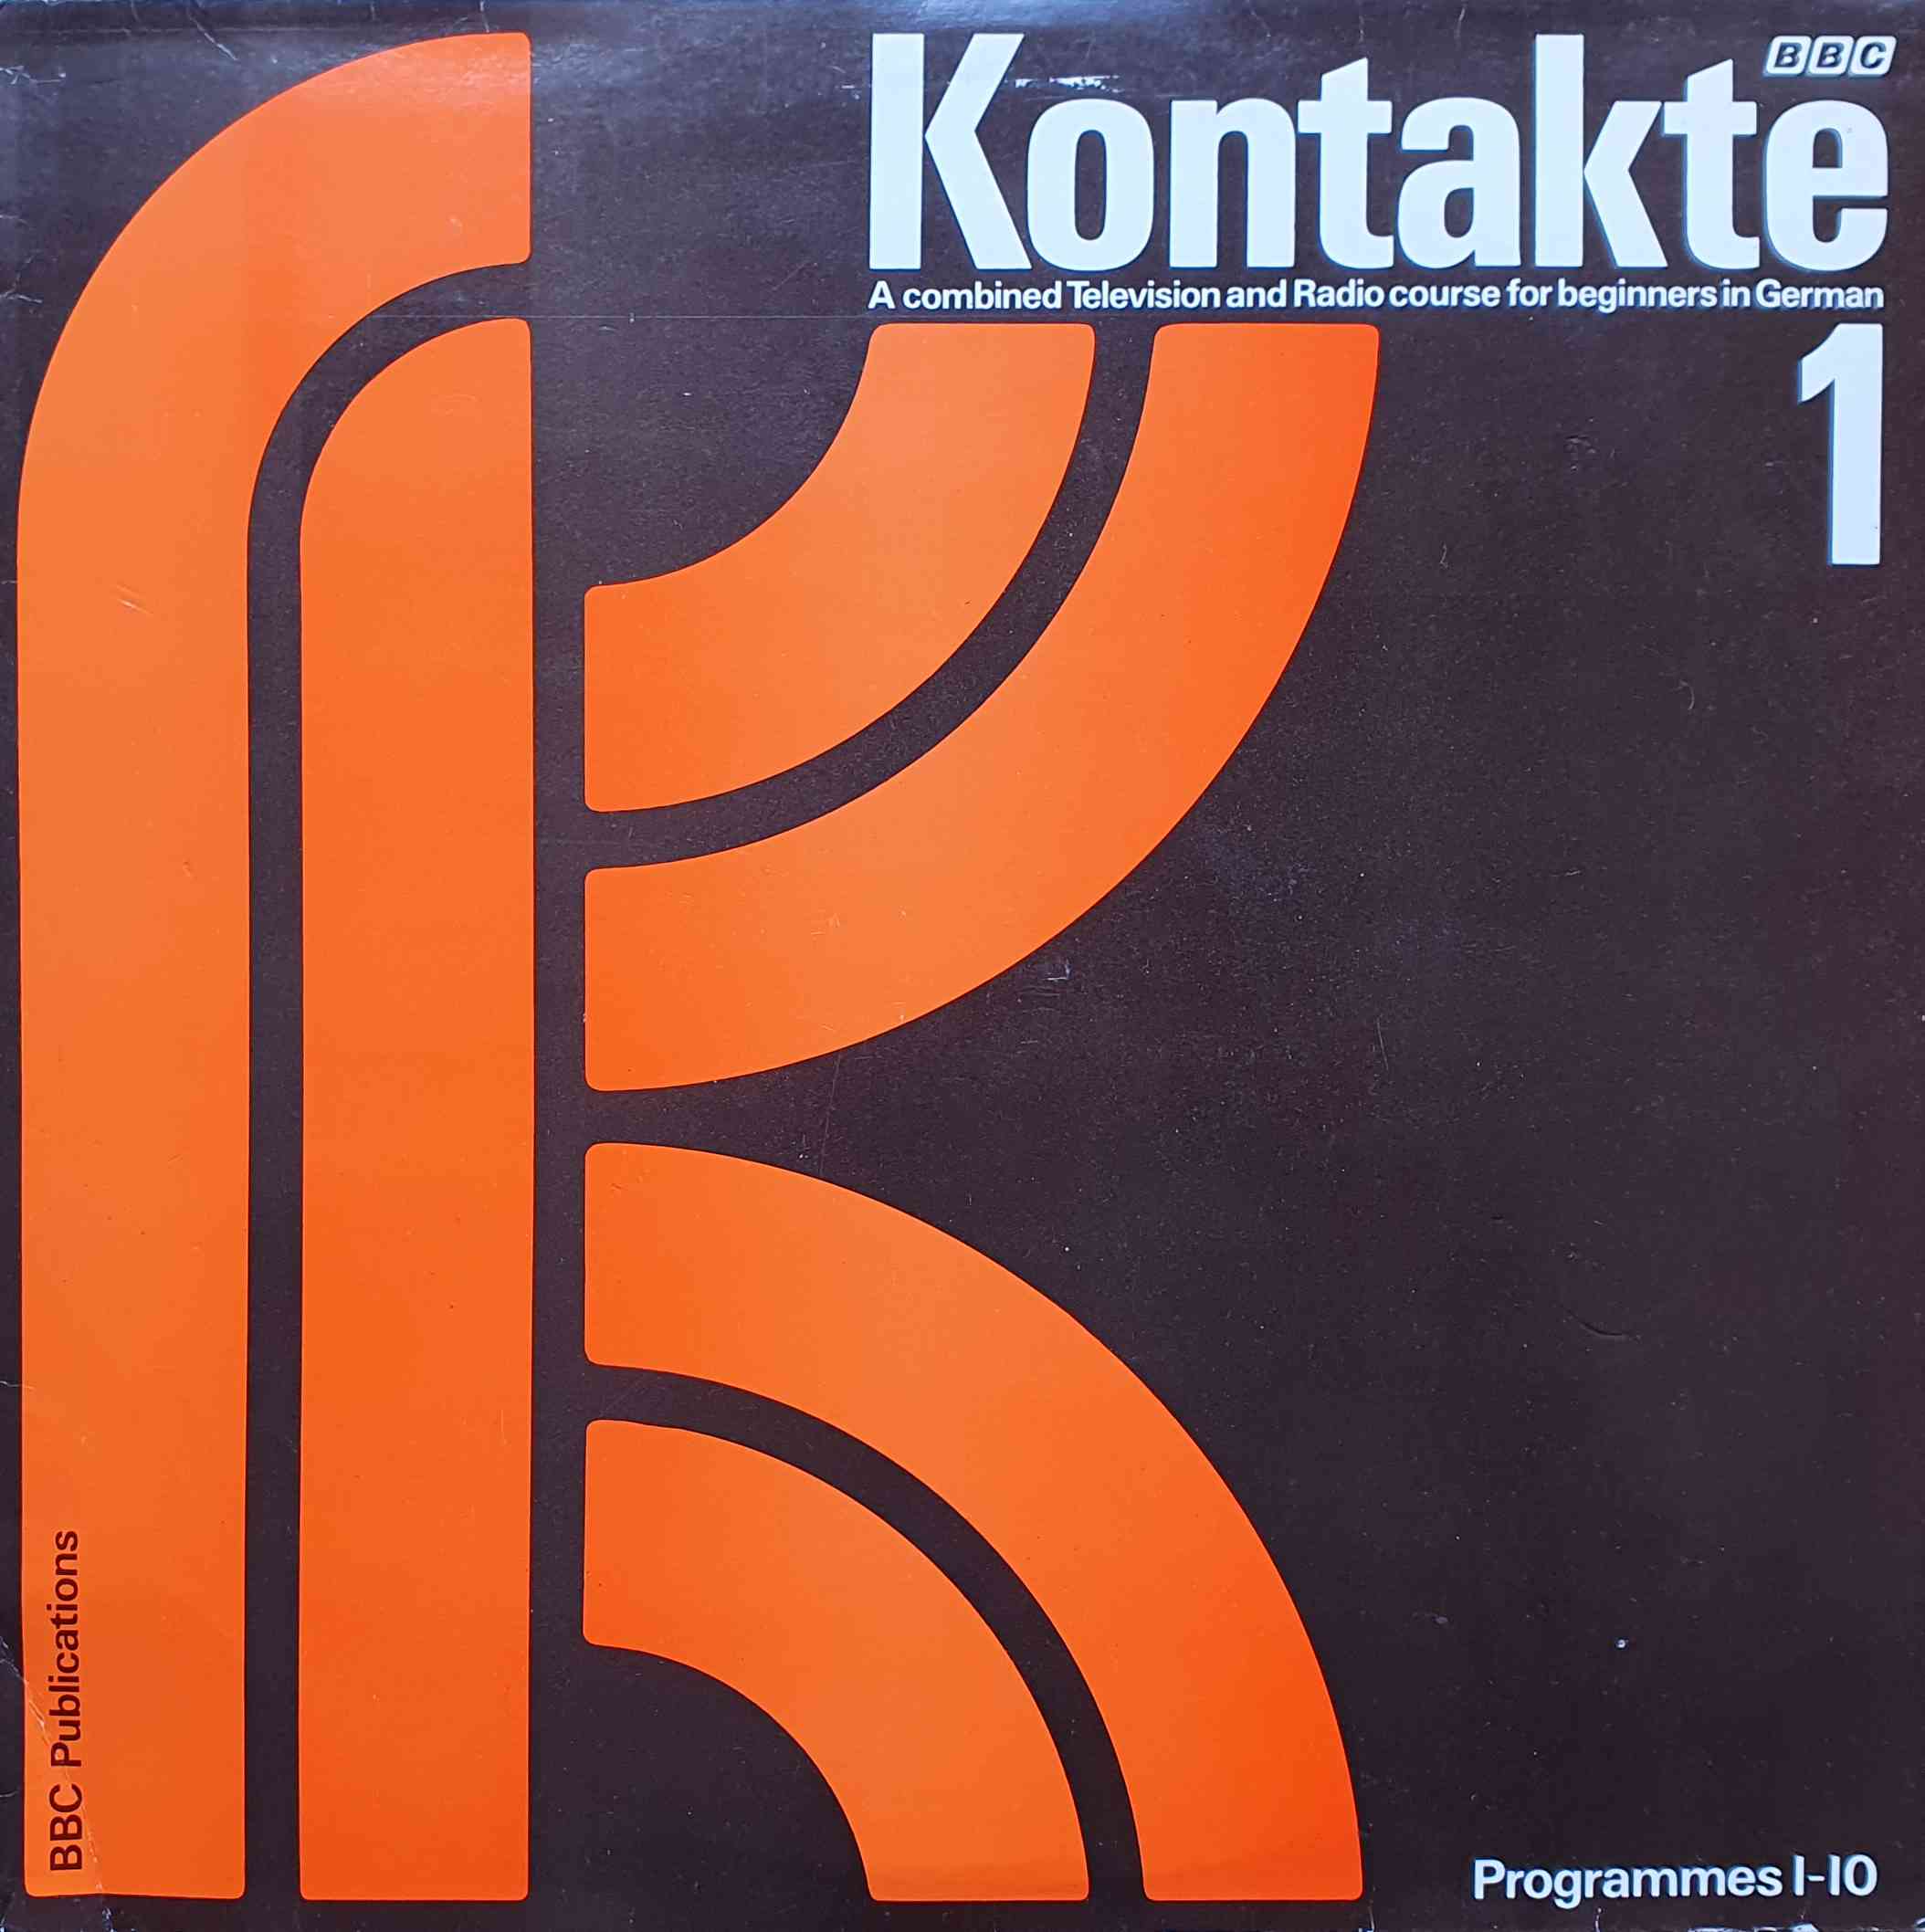 Picture of OP 213 Kontakte - A combined Television and Radio course for beginners in German - Record 1 - Programmes 1 - 10 by artist Corinna Schnabel / Antony Peck